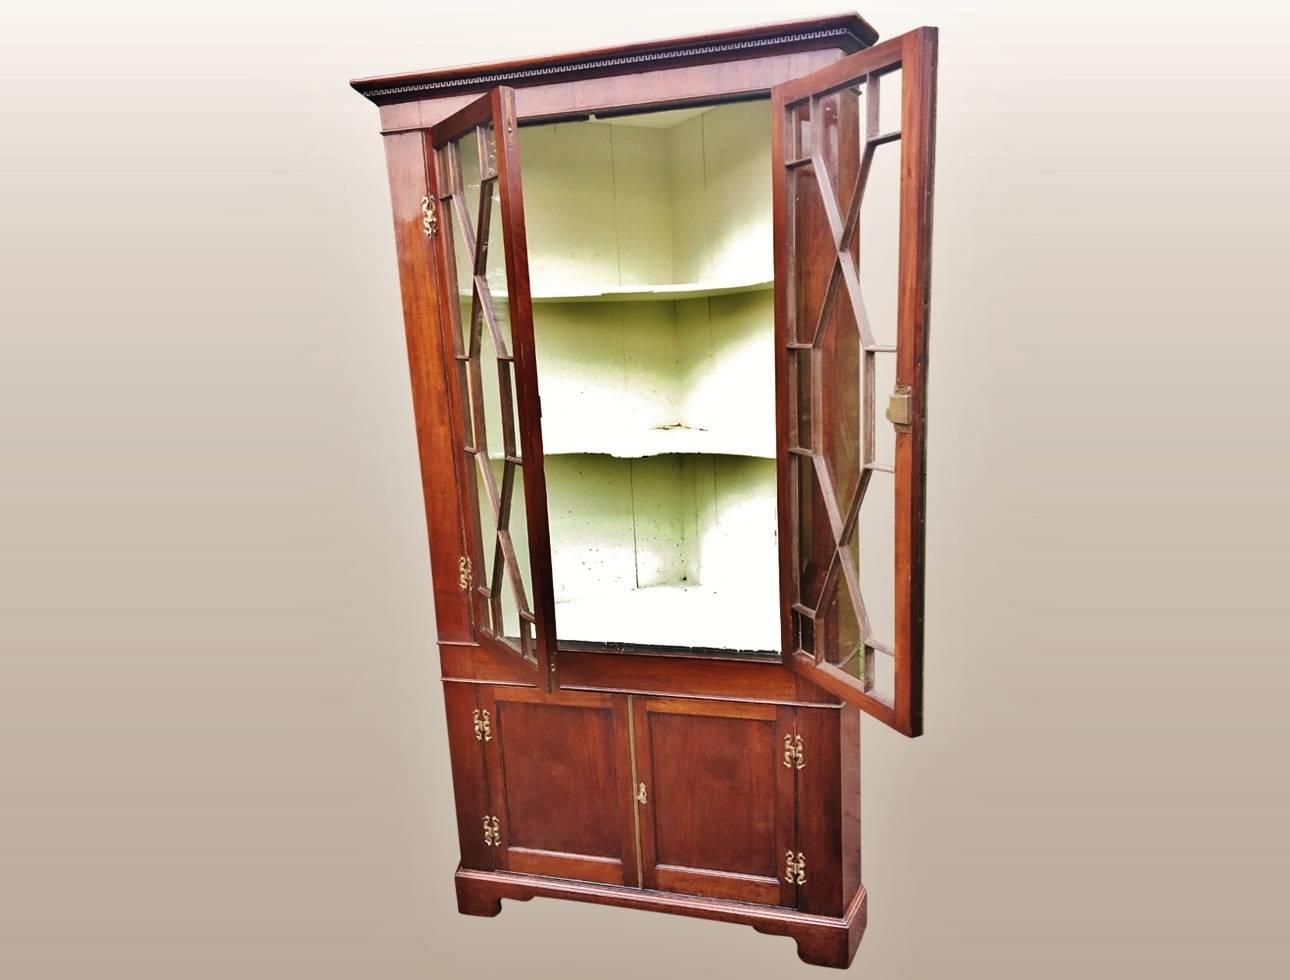 Fine quality mahogany corner cupboard dated, circa 1800s.
This delightful one-piece cabinet has been well looked after and retains a mellow antique patination. Both doors have intricate glazing with clear original glass. The two-door bottom